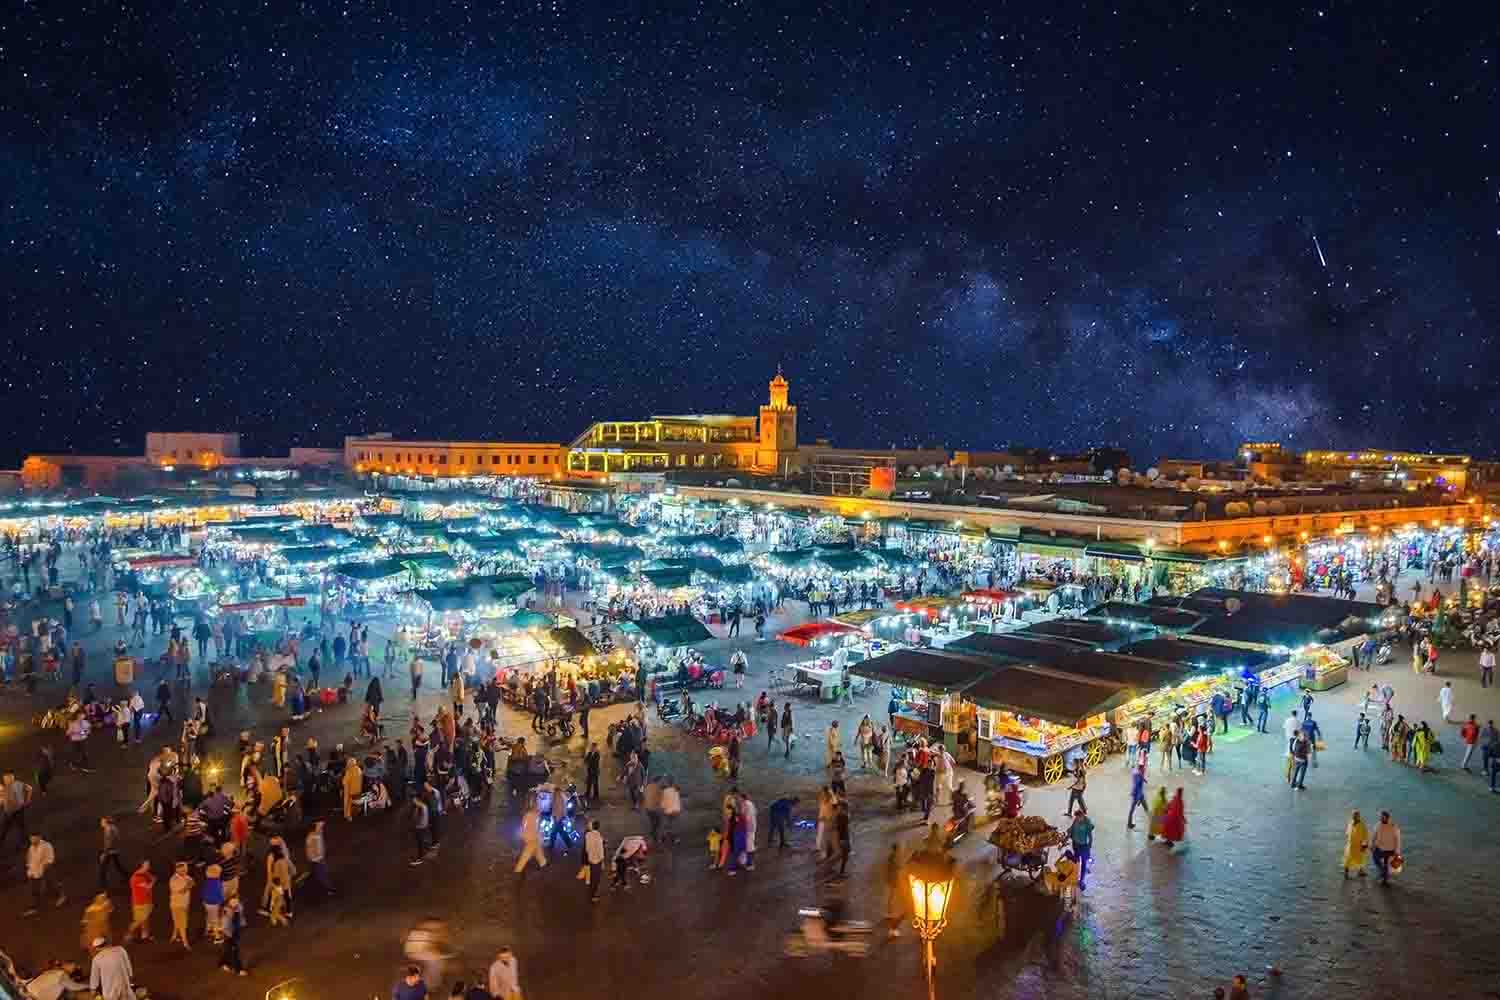 Night-time view of bustling marketplace full of food vendors